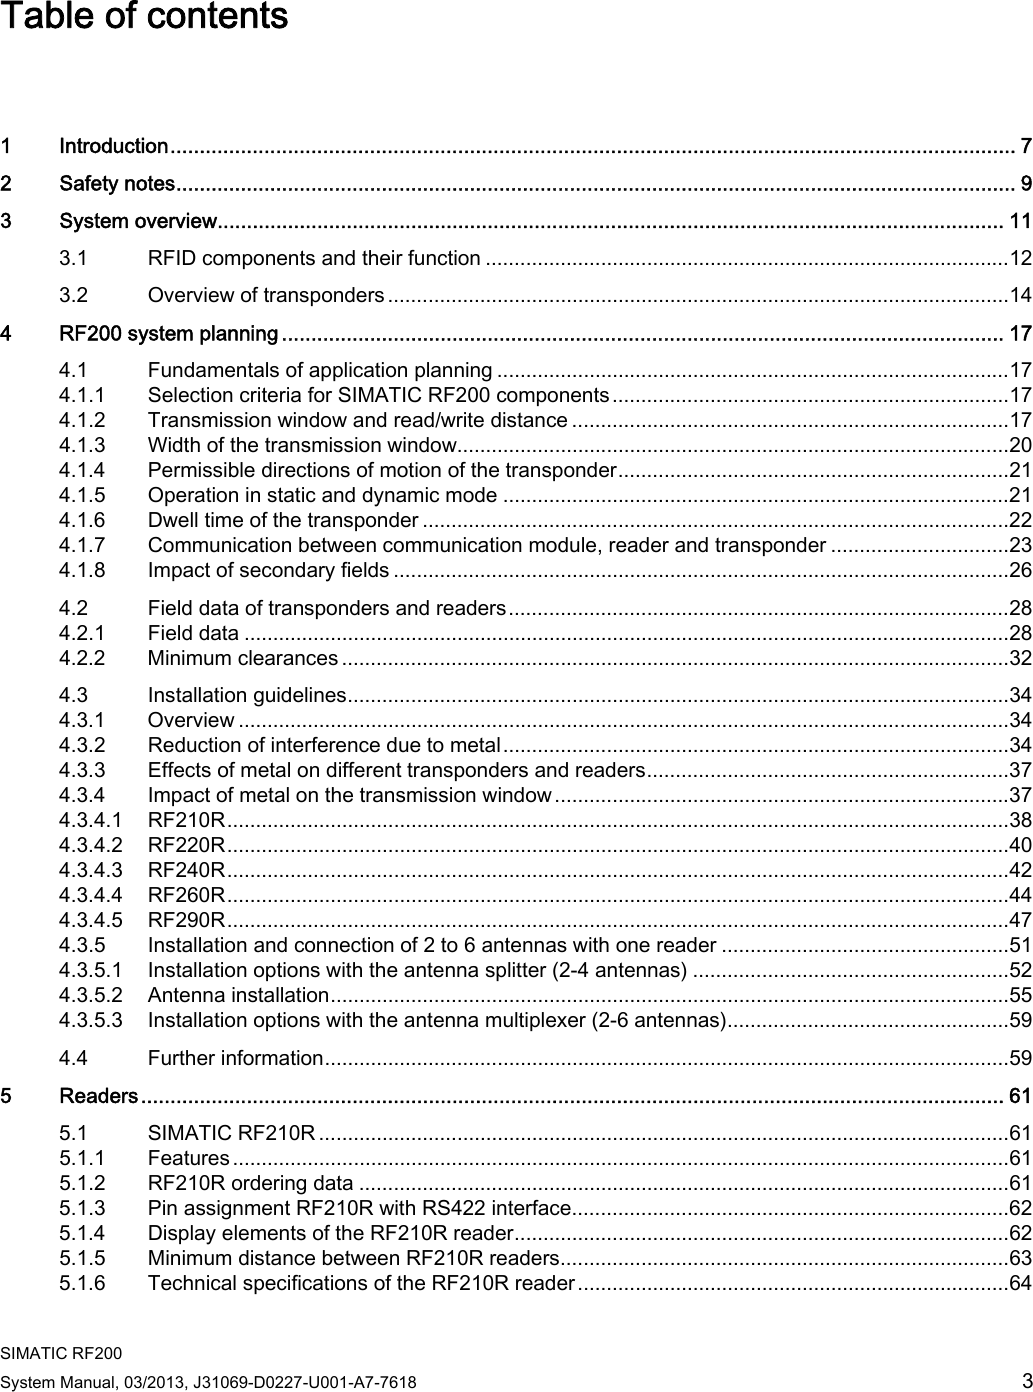  SIMATIC RF200 System Manual, 03/2013, J31069-D0227-U001-A7-7618  3 Table of contents  1  Introduction................................................................................................................................................ 7 2  Safety notes............................................................................................................................................... 9 3  System overview...................................................................................................................................... 11 3.1  RFID components and their function ...........................................................................................12 3.2  Overview of transponders ............................................................................................................14 4  RF200 system planning ........................................................................................................................... 17 4.1  Fundamentals of application planning .........................................................................................17 4.1.1  Selection criteria for SIMATIC RF200 components.....................................................................17 4.1.2  Transmission window and read/write distance ............................................................................17 4.1.3  Width of the transmission window................................................................................................20 4.1.4  Permissible directions of motion of the transponder....................................................................21 4.1.5  Operation in static and dynamic mode ........................................................................................21 4.1.6  Dwell time of the transponder ......................................................................................................22 4.1.7  Communication between communication module, reader and transponder ...............................23 4.1.8  Impact of secondary fields ...........................................................................................................26 4.2  Field data of transponders and readers.......................................................................................28 4.2.1  Field data .....................................................................................................................................28 4.2.2  Minimum clearances ....................................................................................................................32 4.3  Installation guidelines...................................................................................................................34 4.3.1  Overview ......................................................................................................................................34 4.3.2  Reduction of interference due to metal........................................................................................34 4.3.3  Effects of metal on different transponders and readers...............................................................37 4.3.4  Impact of metal on the transmission window ...............................................................................37 4.3.4.1  RF210R........................................................................................................................................38 4.3.4.2  RF220R........................................................................................................................................40 4.3.4.3  RF240R........................................................................................................................................42 4.3.4.4  RF260R........................................................................................................................................44 4.3.4.5  RF290R........................................................................................................................................47 4.3.5  Installation and connection of 2 to 6 antennas with one reader ..................................................51 4.3.5.1  Installation options with the antenna splitter (2-4 antennas) .......................................................52 4.3.5.2  Antenna installation......................................................................................................................55 4.3.5.3  Installation options with the antenna multiplexer (2-6 antennas).................................................59 4.4  Further information.......................................................................................................................59 5  Readers................................................................................................................................................... 61 5.1  SIMATIC RF210R ........................................................................................................................61 5.1.1  Features.......................................................................................................................................61 5.1.2  RF210R ordering data .................................................................................................................61 5.1.3  Pin assignment RF210R with RS422 interface............................................................................62 5.1.4  Display elements of the RF210R reader......................................................................................62 5.1.5  Minimum distance between RF210R readers..............................................................................63 5.1.6  Technical specifications of the RF210R reader...........................................................................64 